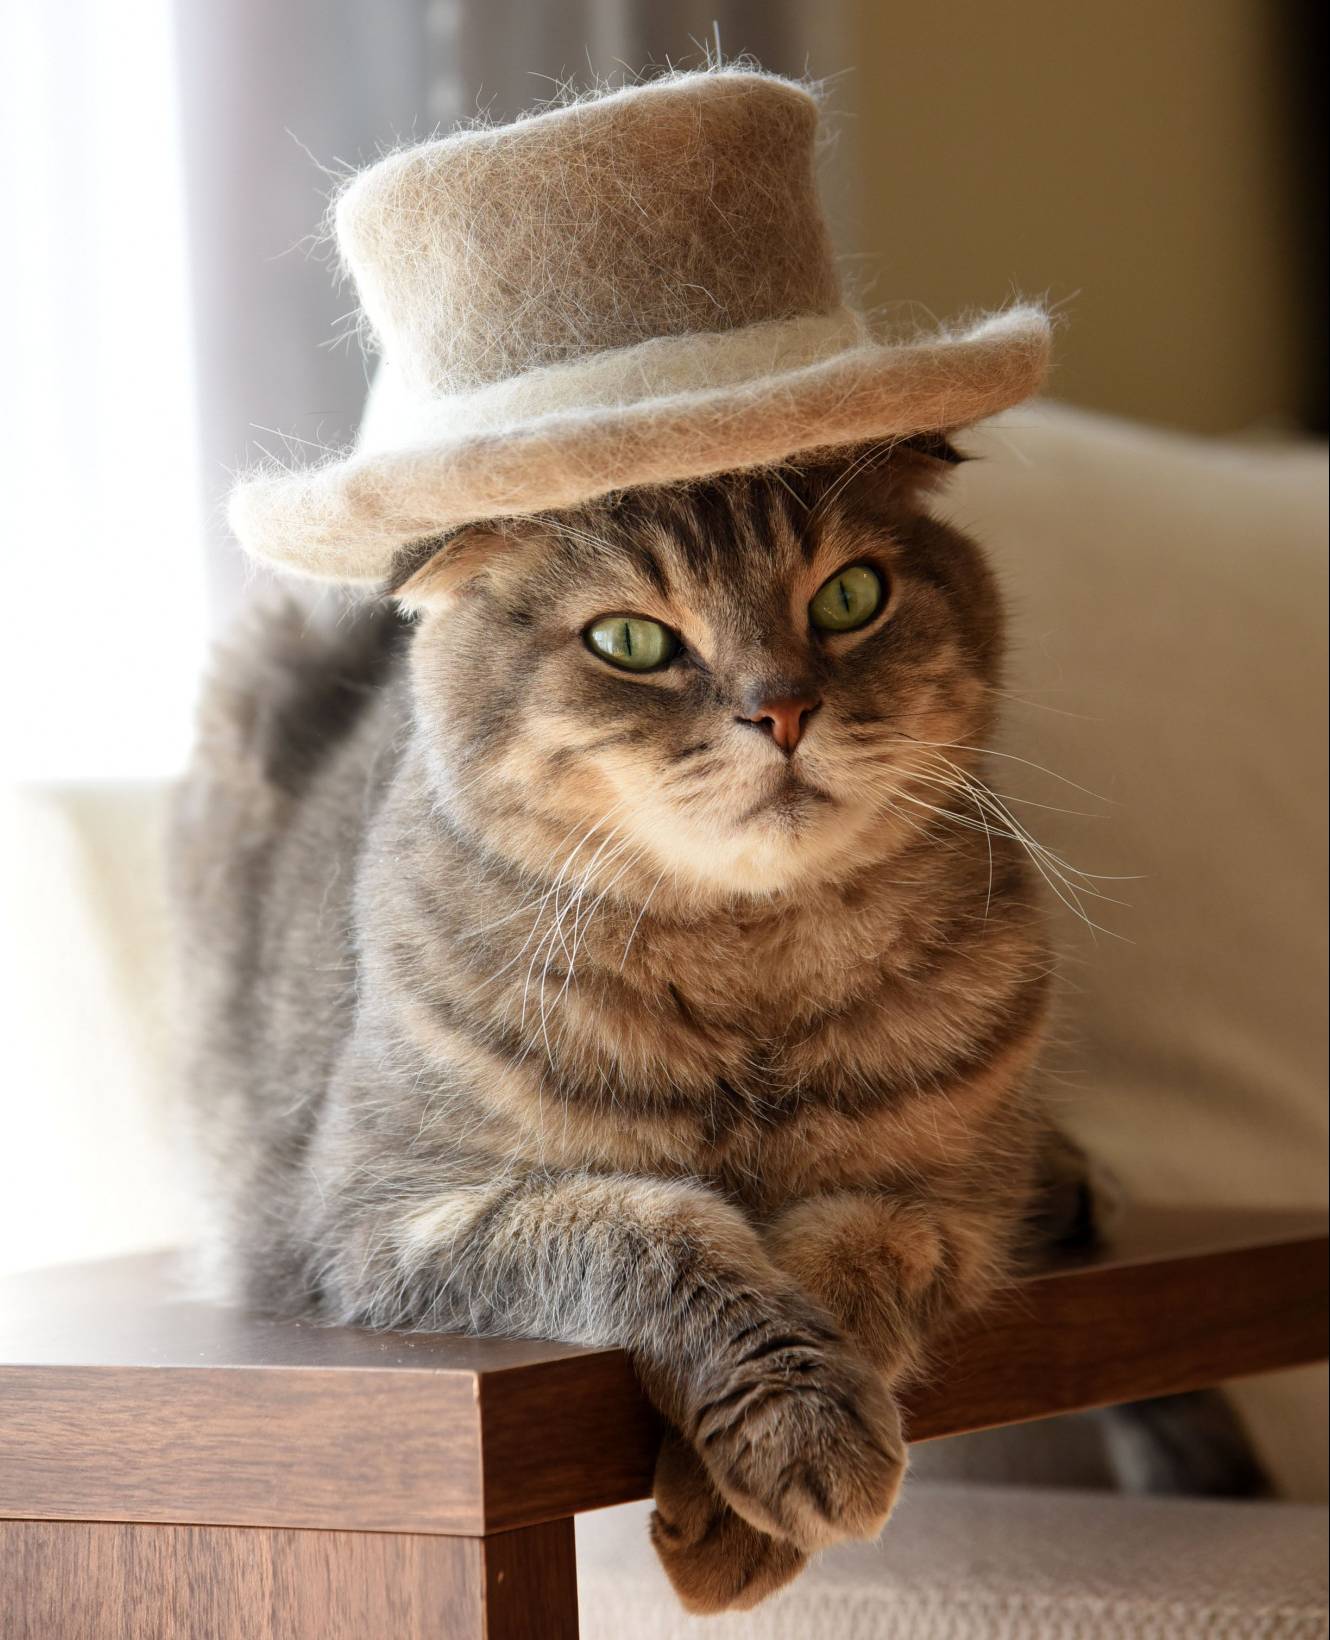 A fuzzy tale of Japan's famous cats in hats - The Japan Times